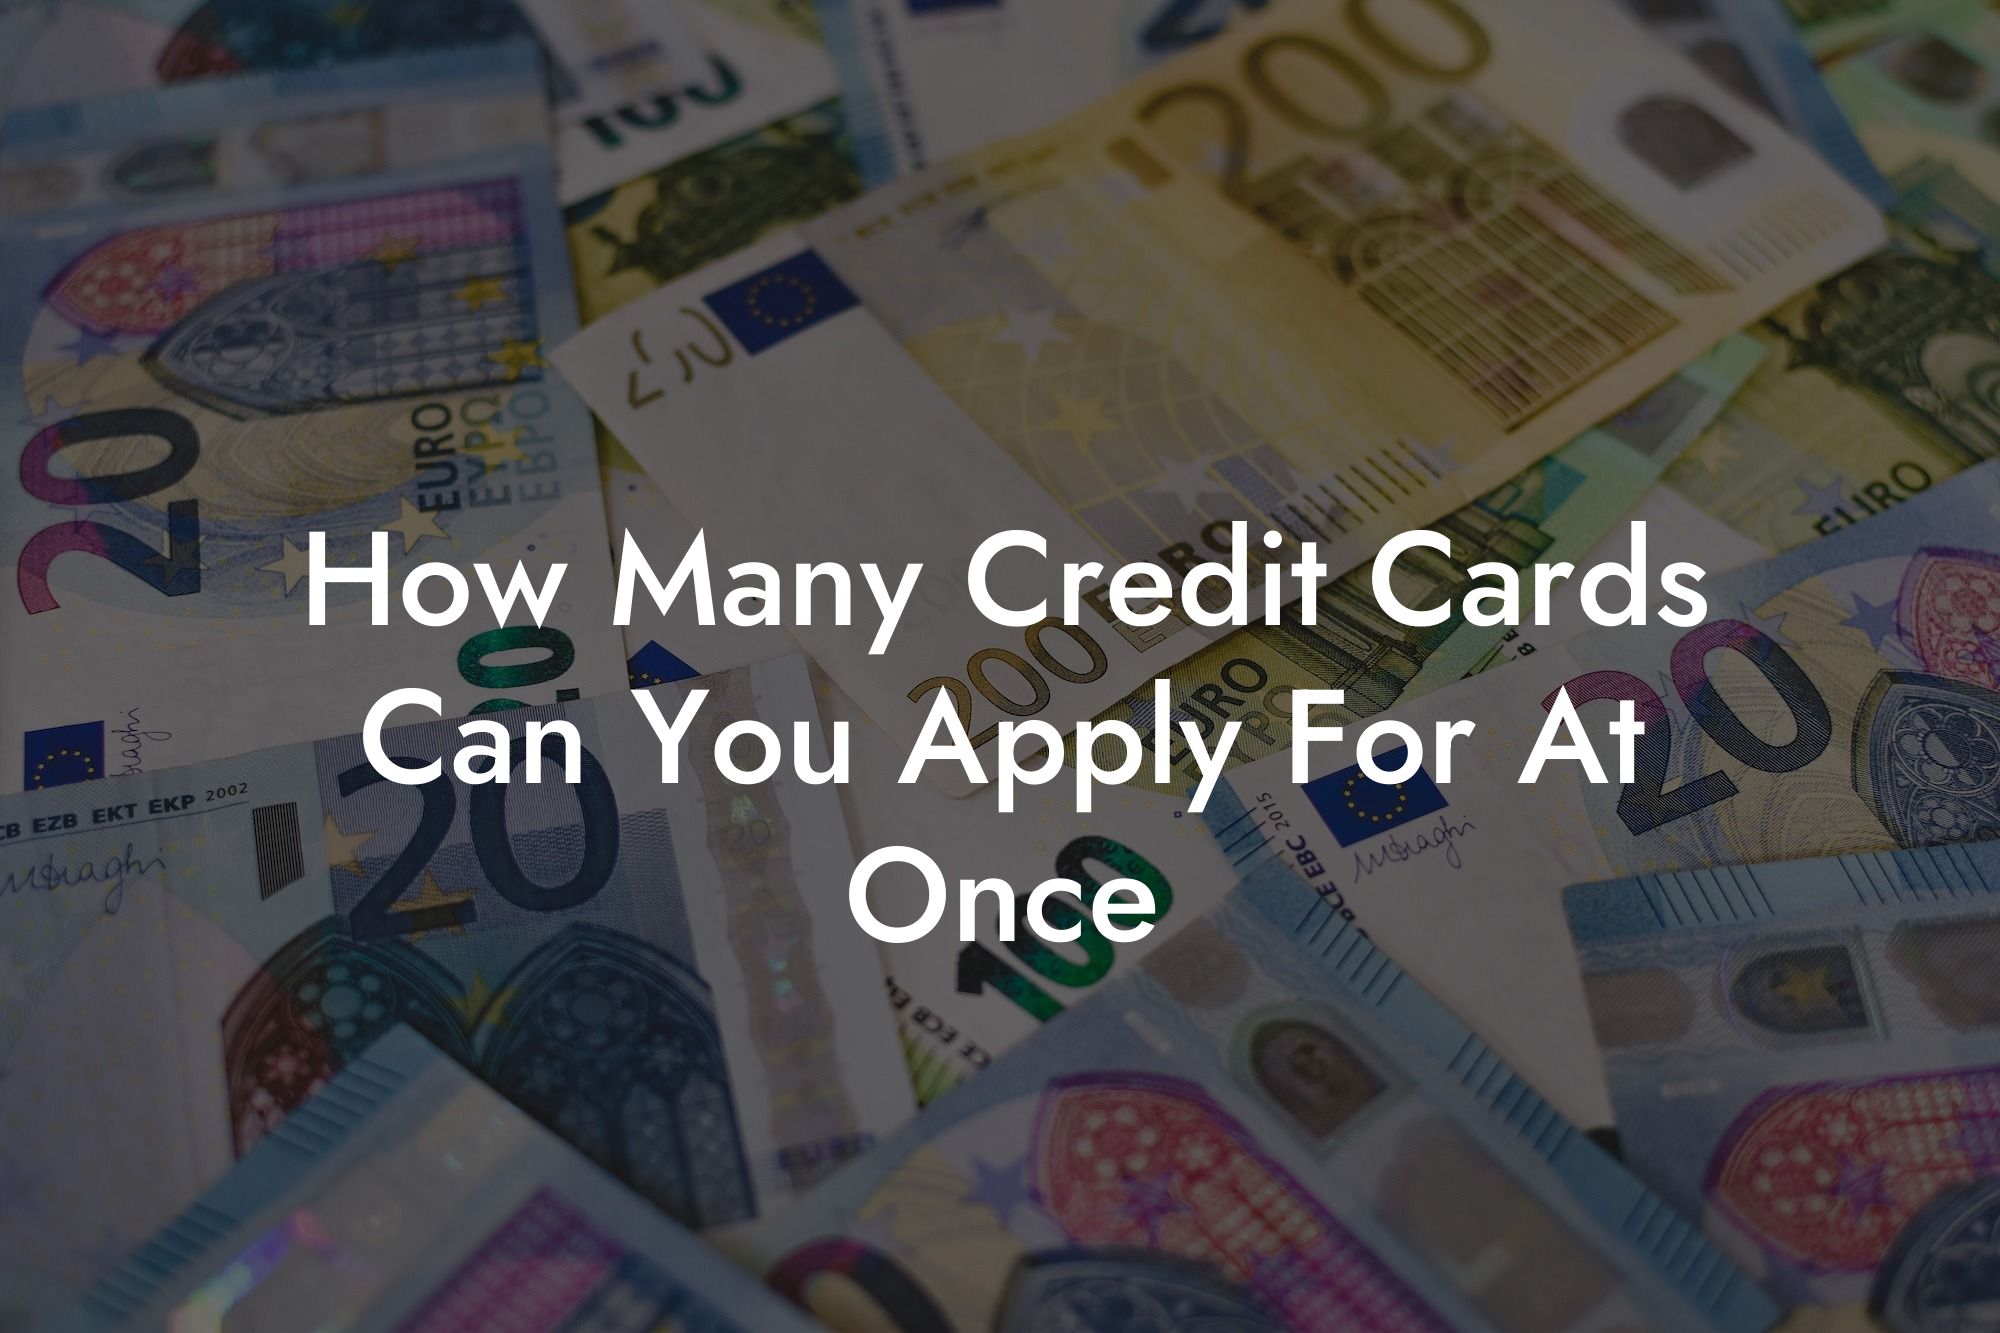 How Many Credit Cards Can You Apply For At Once